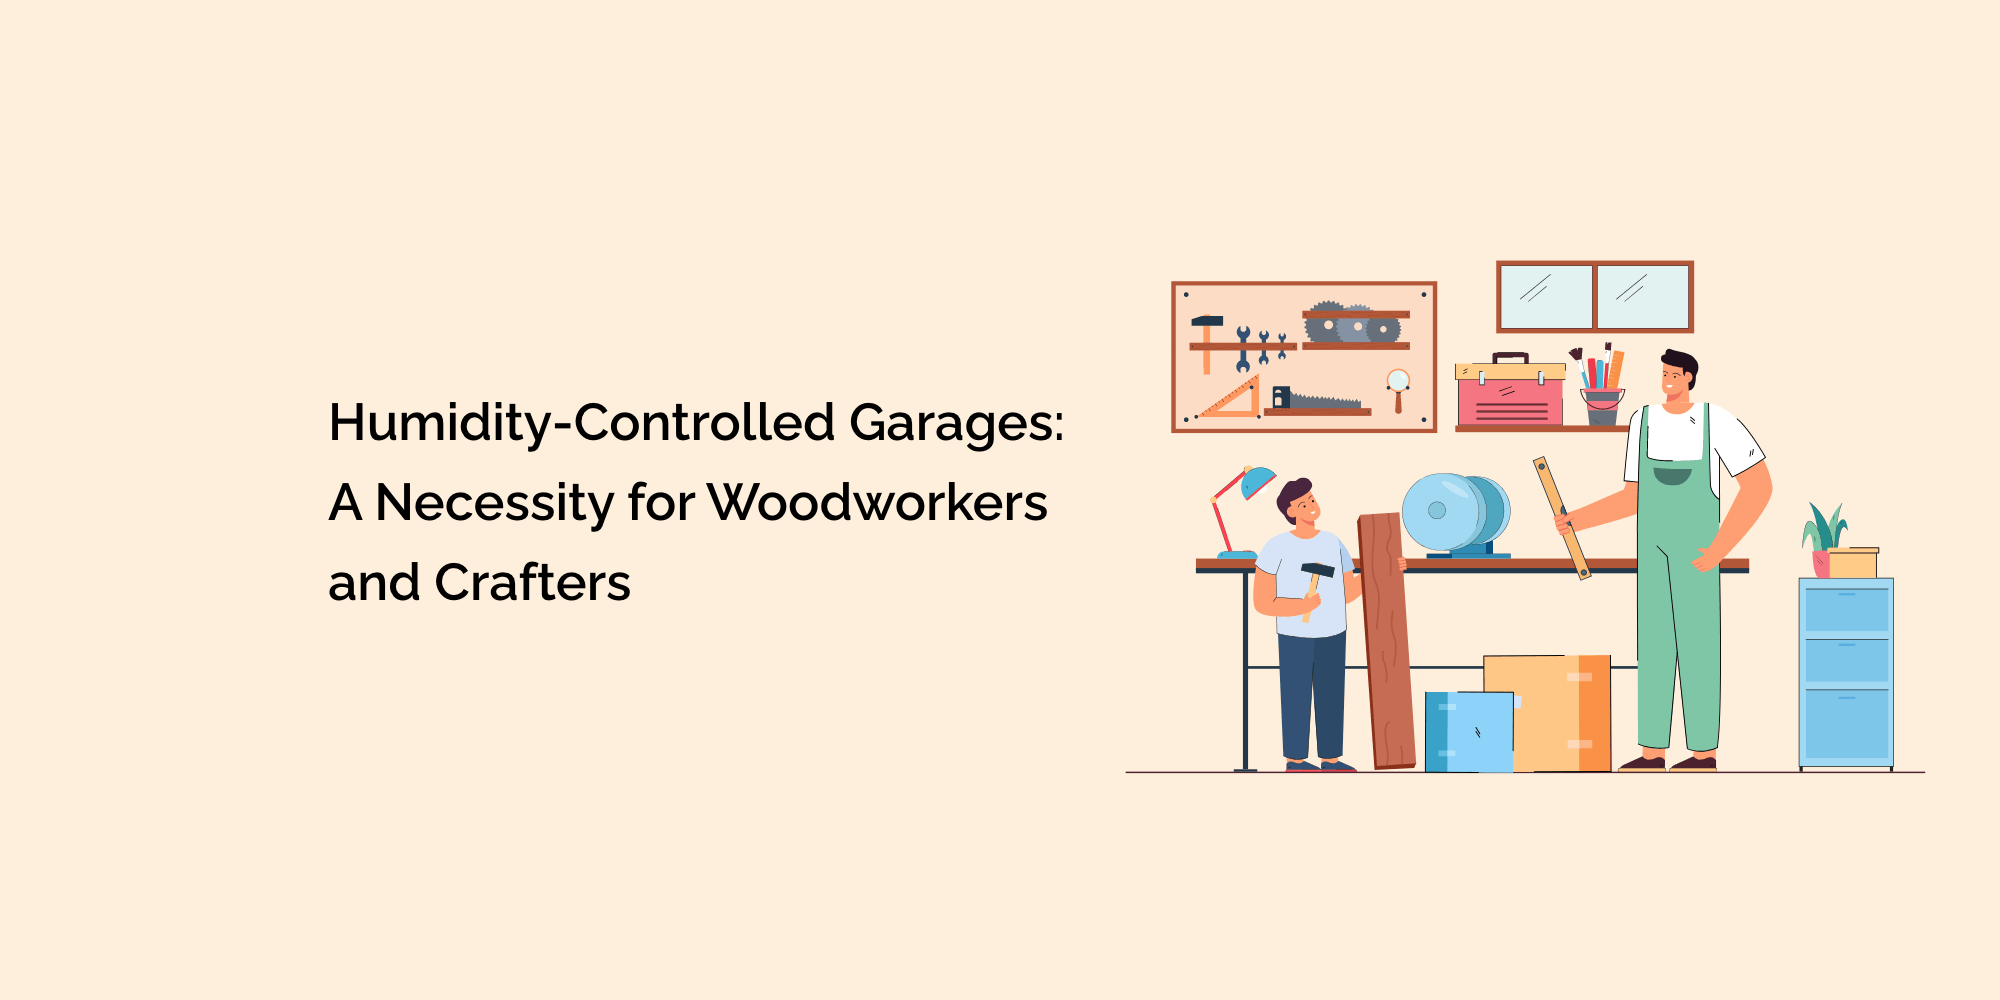 Humidity-Controlled Garages: A Necessity for Woodworkers and Crafters